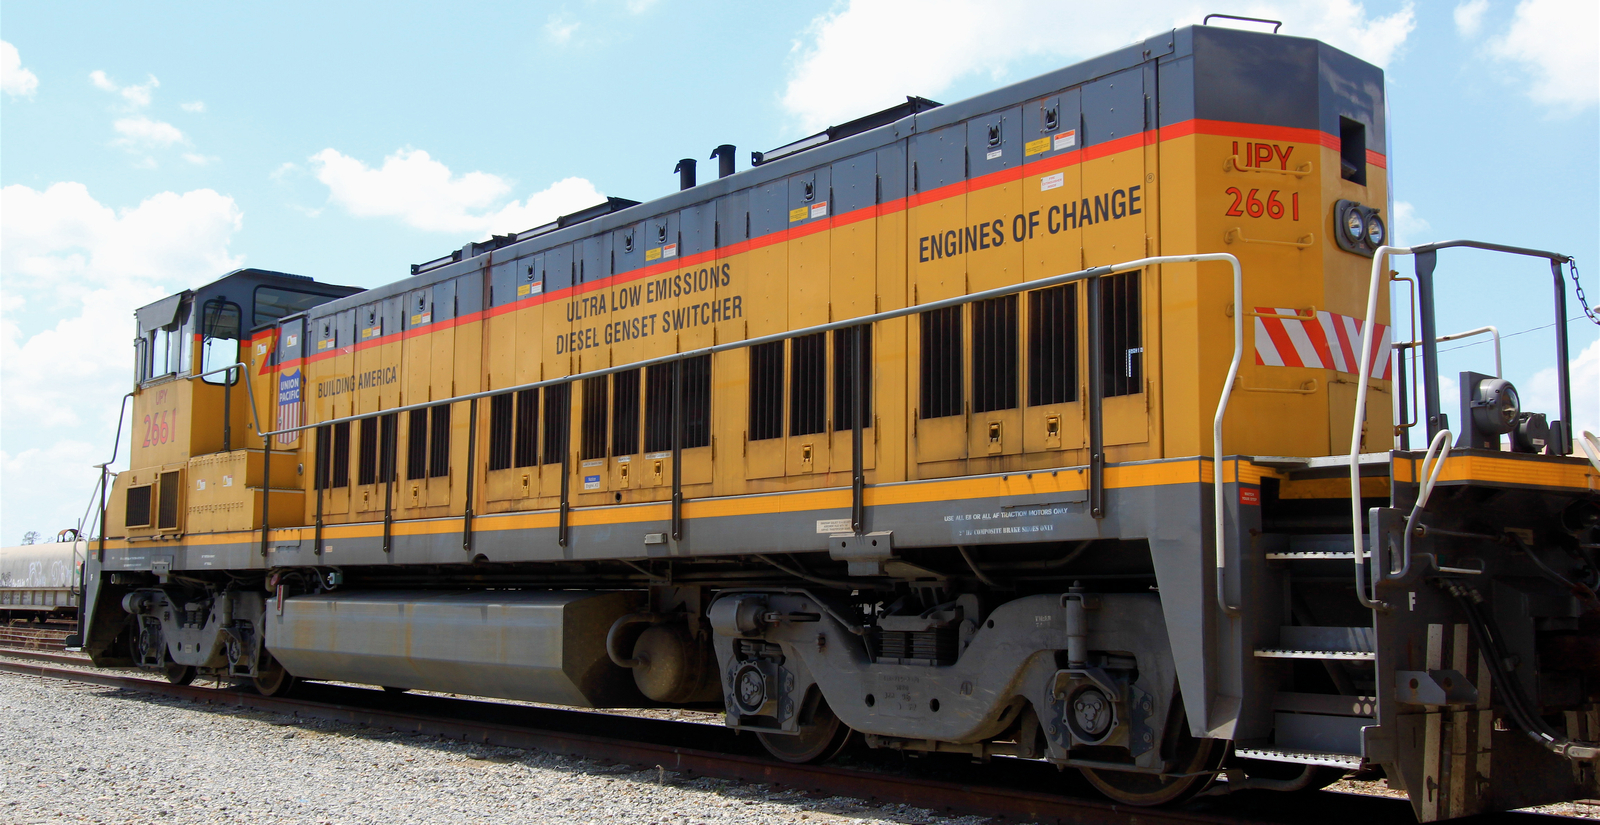 Union Pacific No. 2661, a former GE B23-7, in May 2011 at Houston, Texas